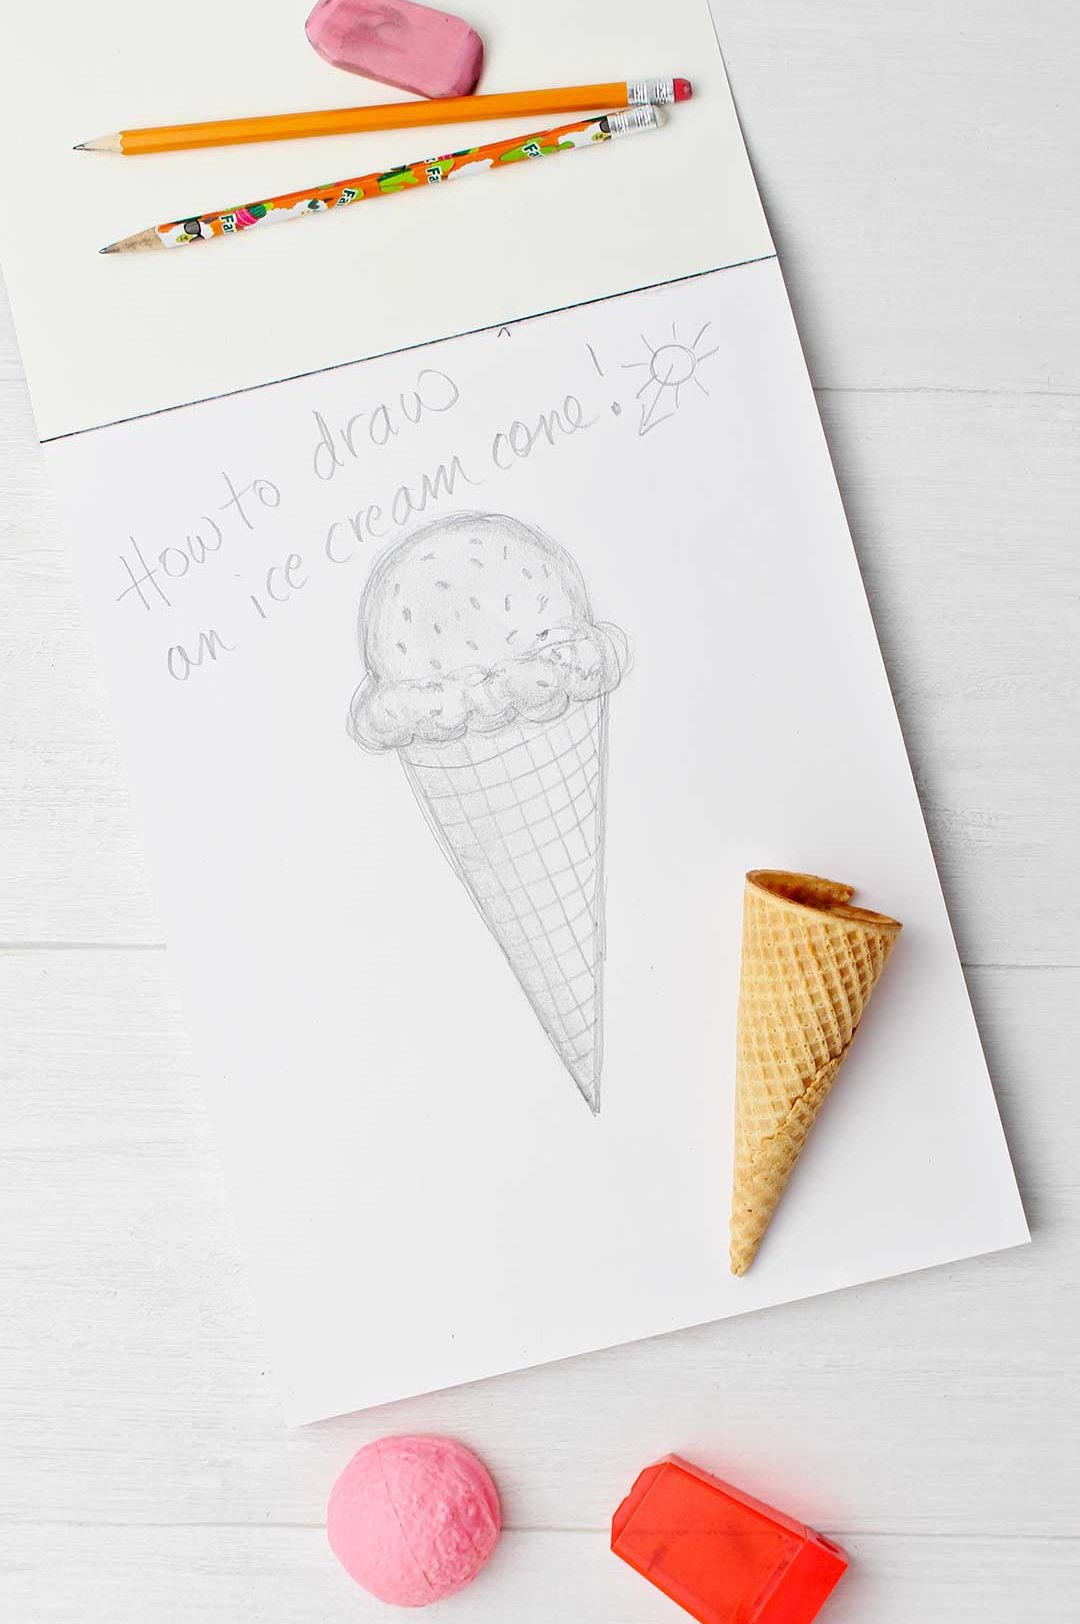 Completed sketch of an ice cream cone done in pencil with eraser, pencils and an ice cream cone resting near by.